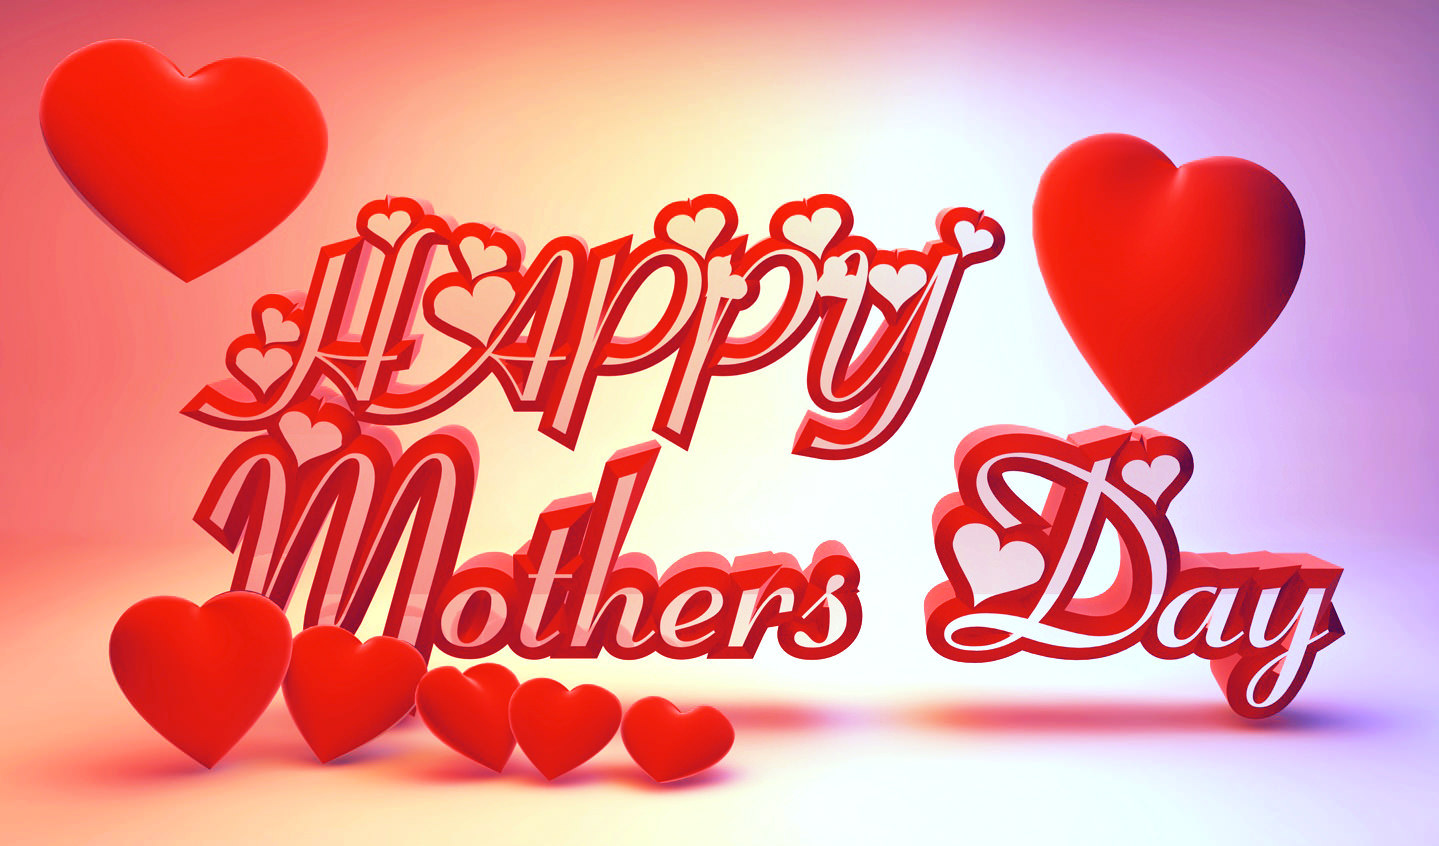 Best Happy Mothers Day Image Wallpaper Quotes